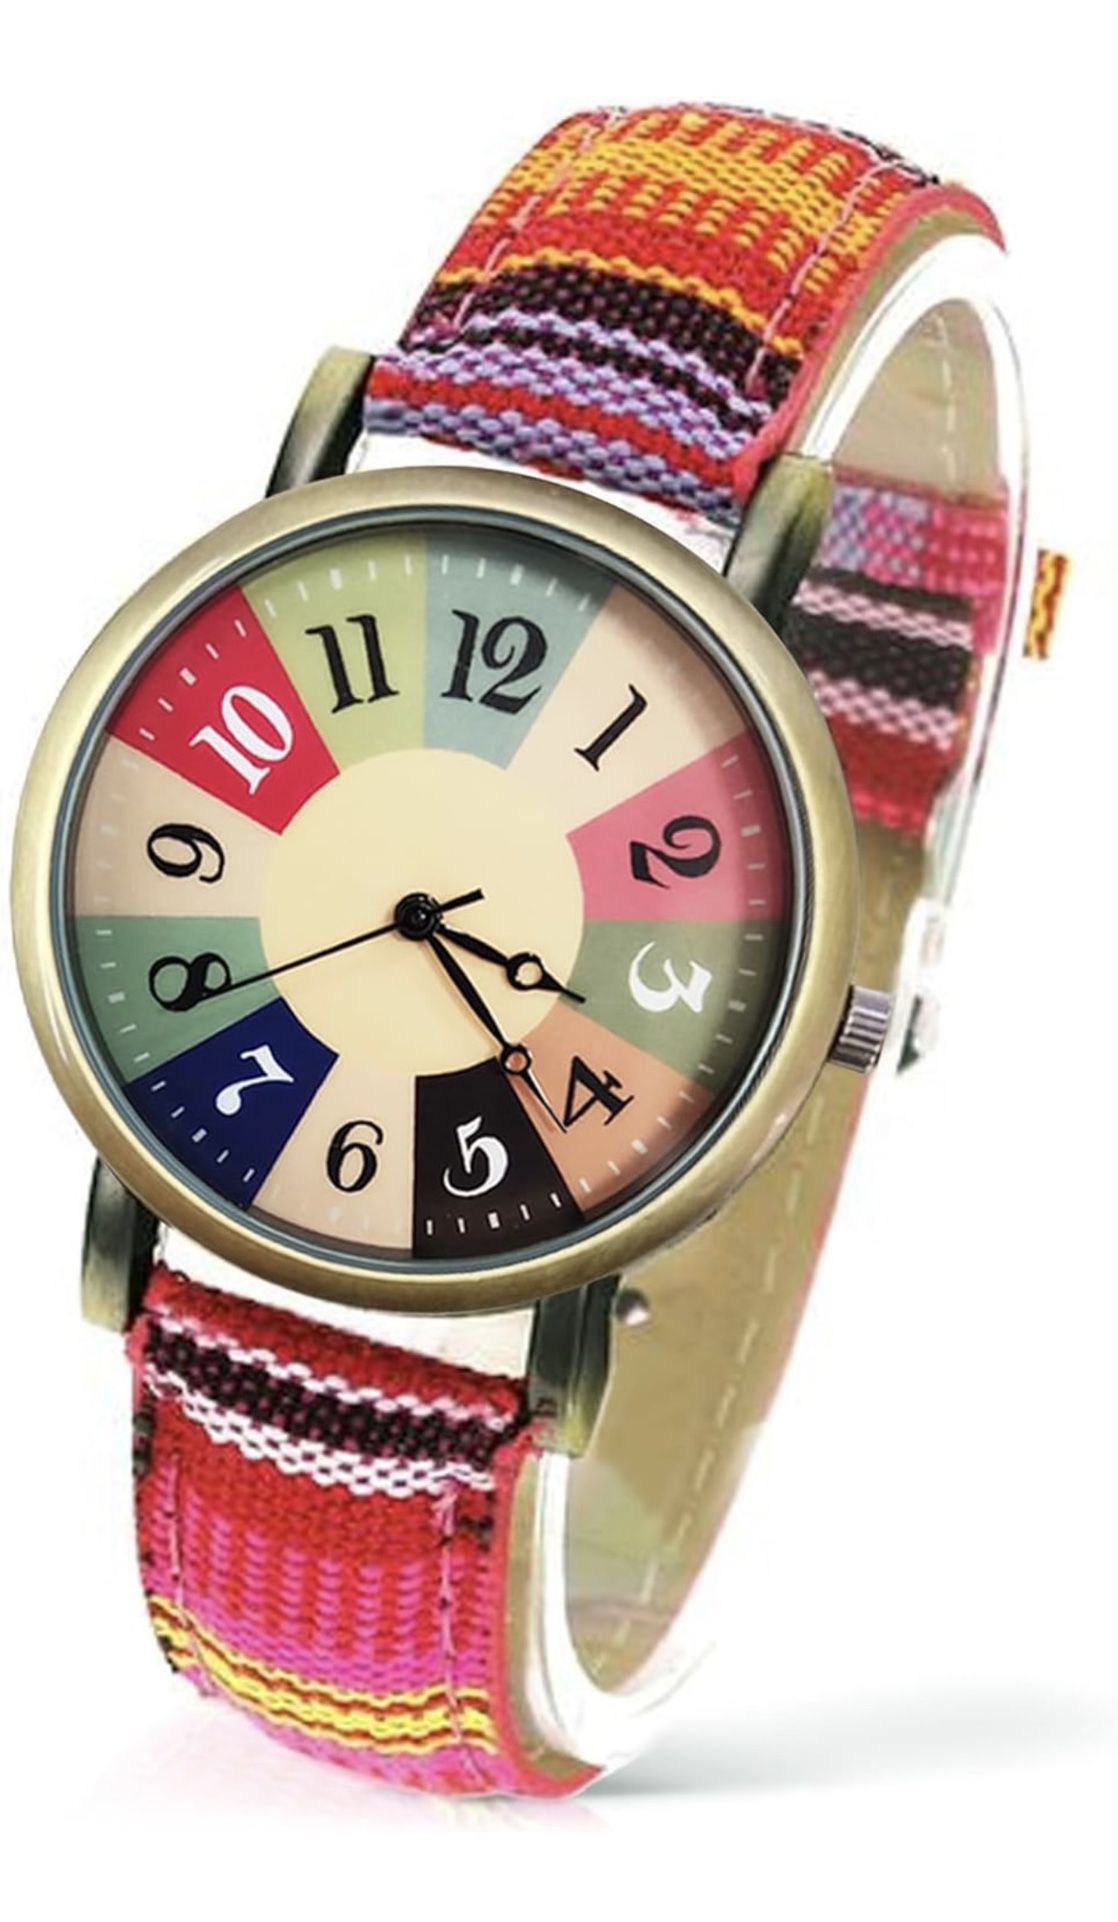 BRAND NEW IN BOX AstraMinds Ladies Watches for Women - Boho Hippie Womens Watches, PU Leather Woven Rainbow Watch  	